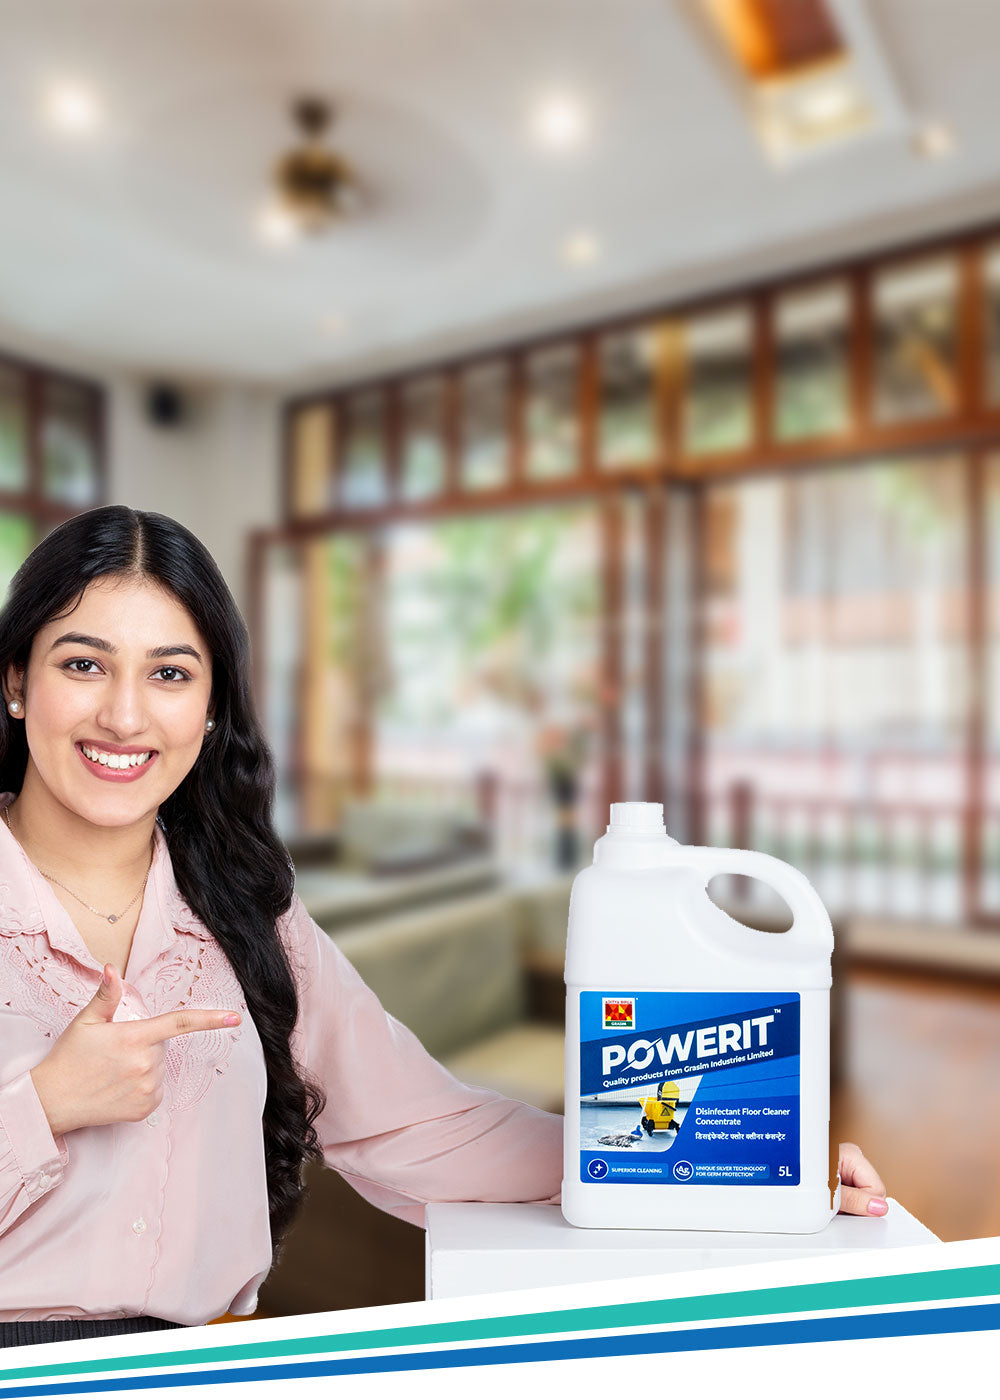 Achieve Deep & Consistent Cleaning Every Day using Powerit - for mobile